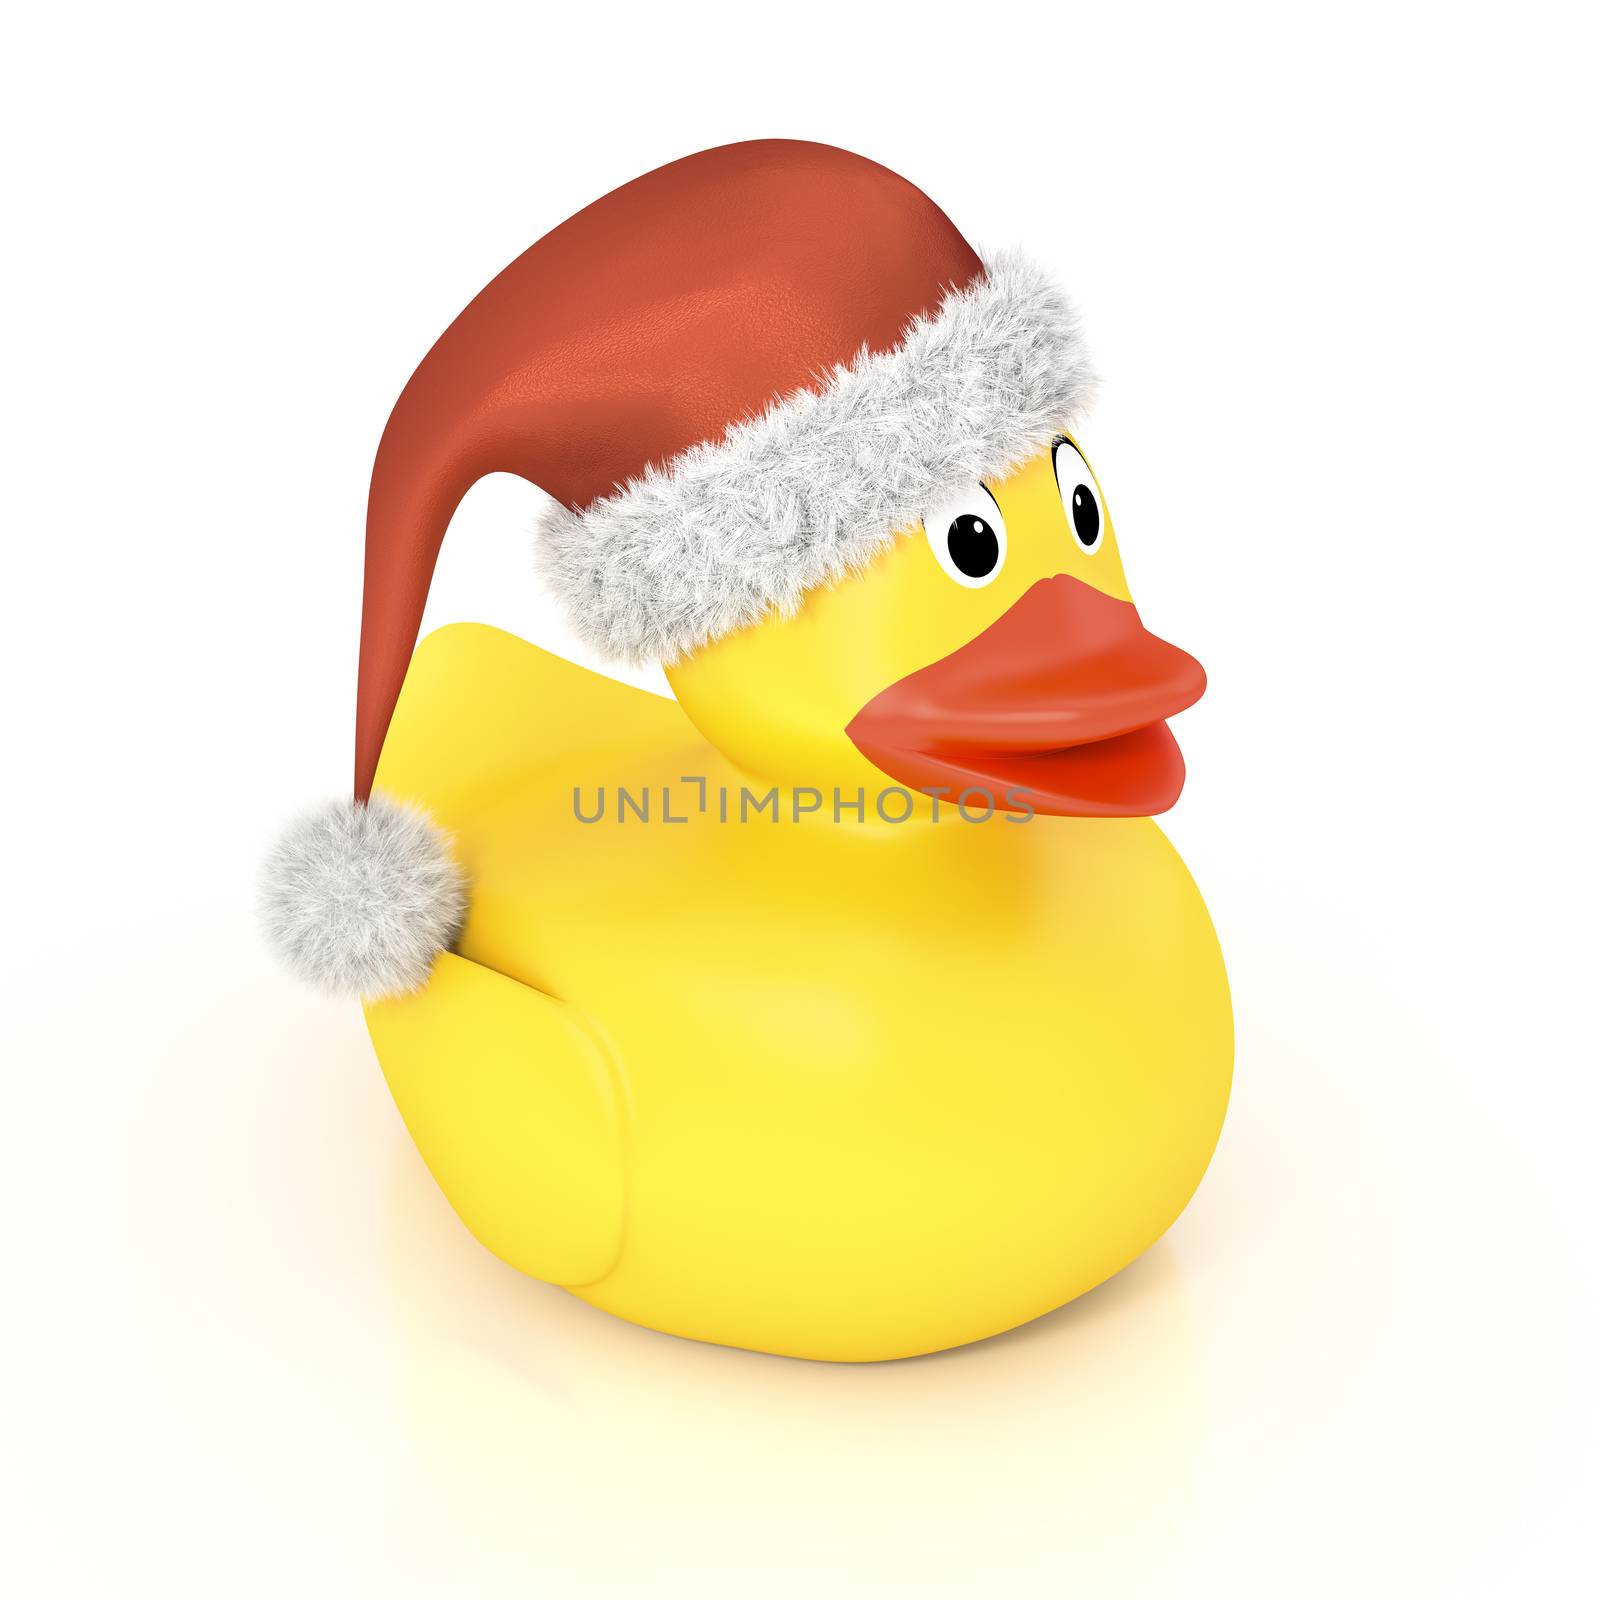 3d rendering of a yellow rubber ducky with a christmas hat